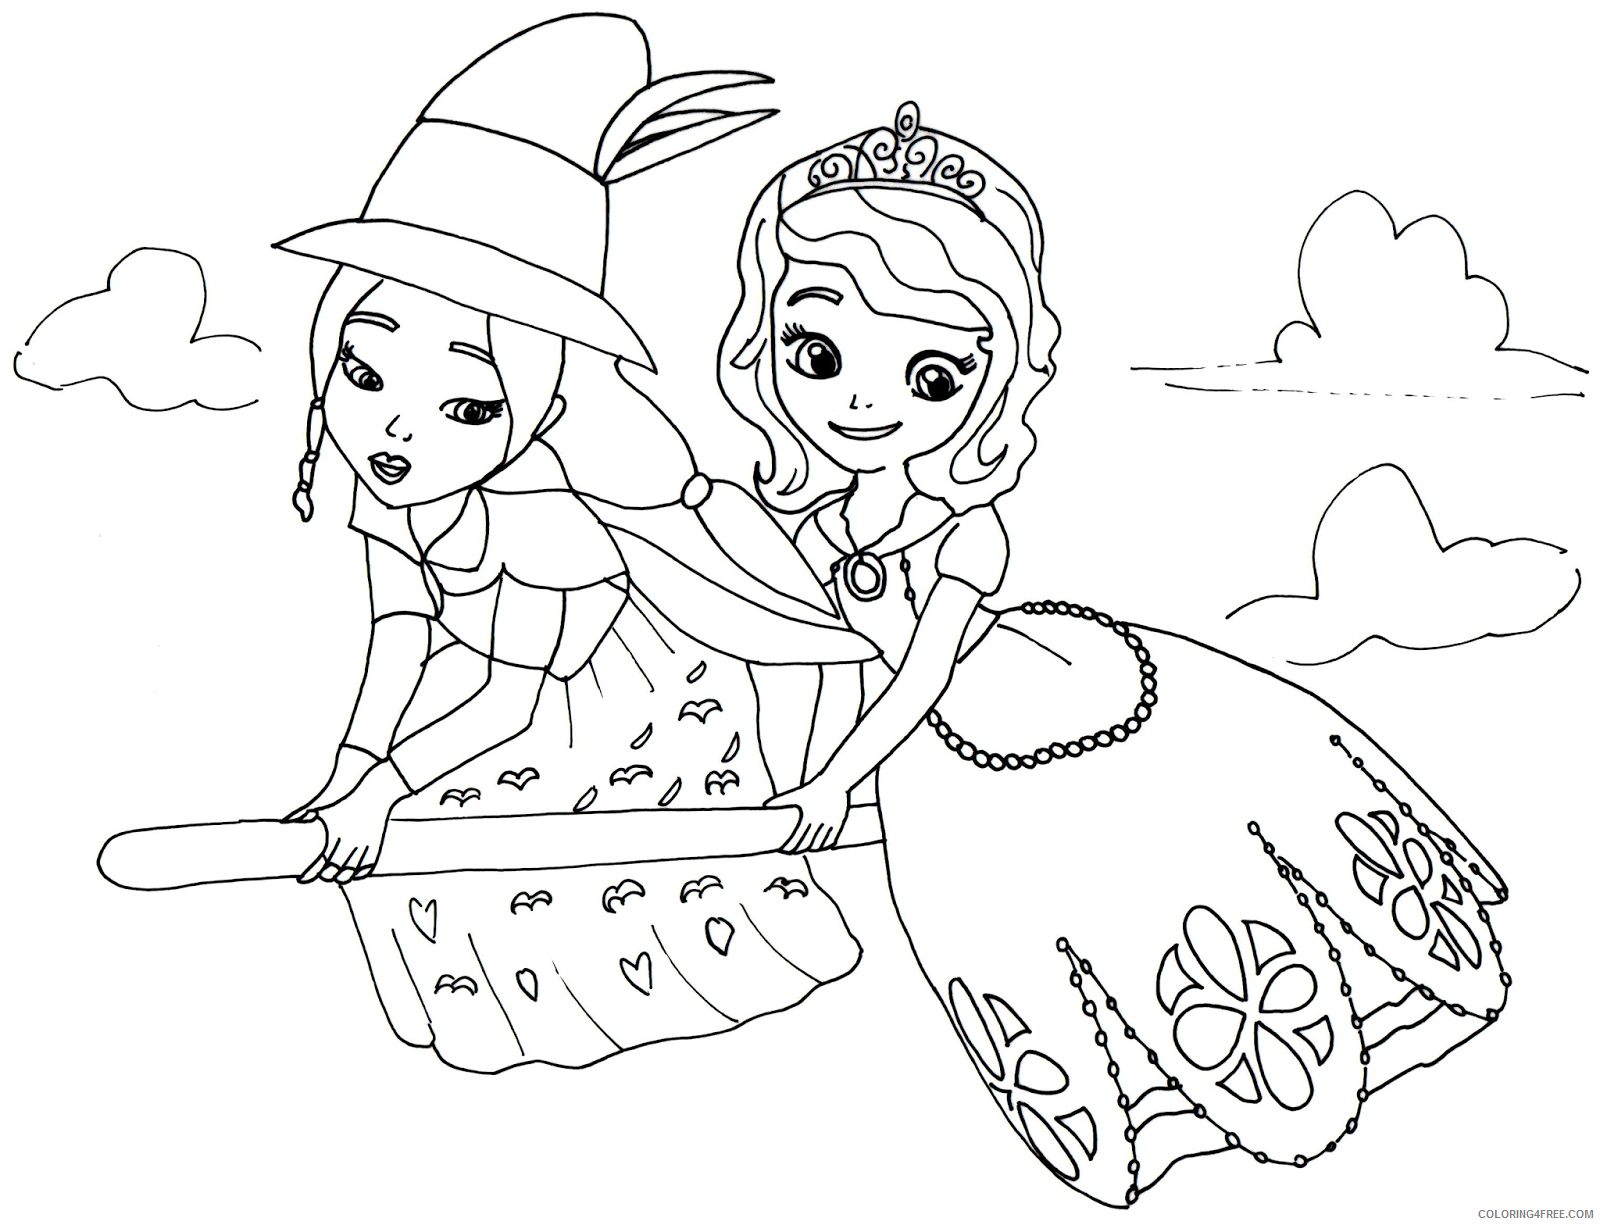 Sofia the First Coloring Pages Cartoons Good Witch Sofia the First Printable 2020 5834 Coloring4free